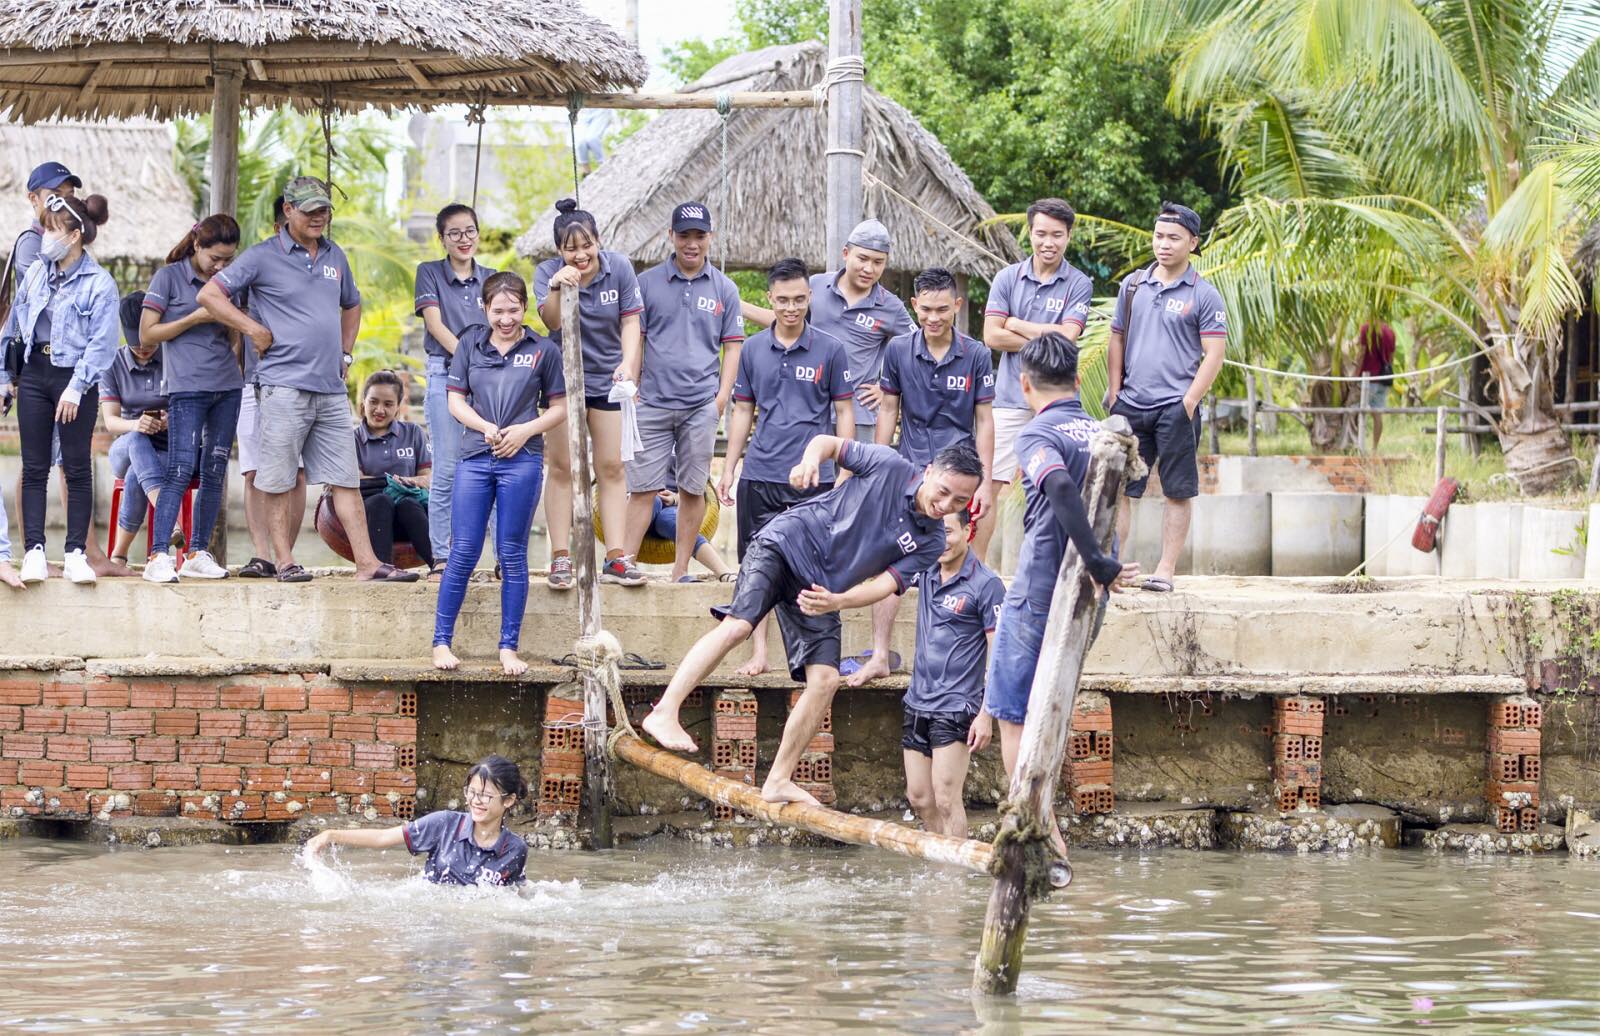 teambuilding refresh your power and lagoon party 2019